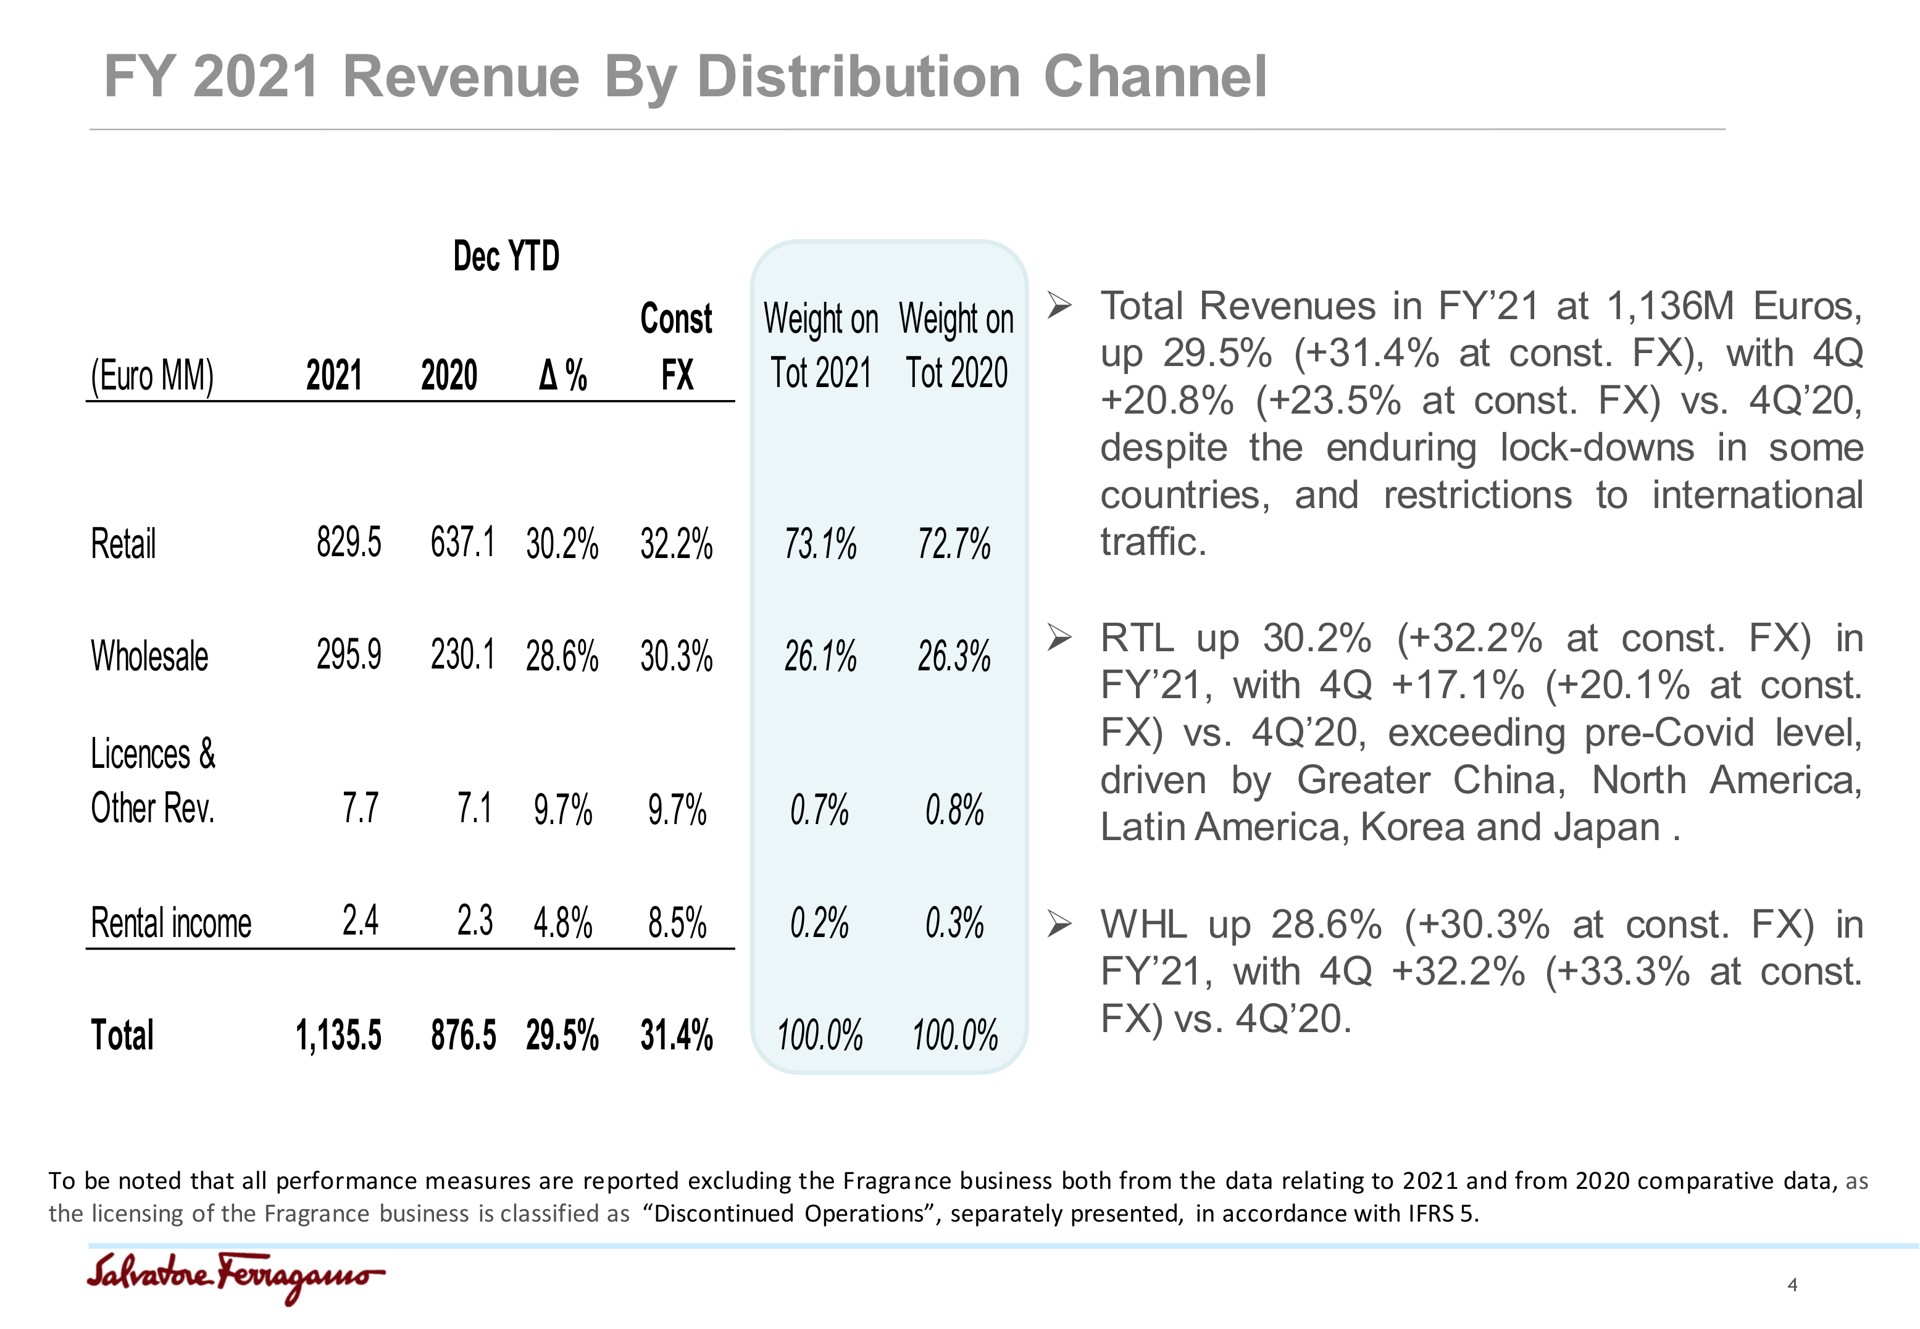 revenue by distribution channel weight on tot weight on tot retail wholesale other rev rental income total total revenues in at up at with at despite the enduring lock downs in some countries and restrictions to international traffic up at in with at exceeding covid level driven by greater china north and japan up at in with at a | Salvatore Ferragamo